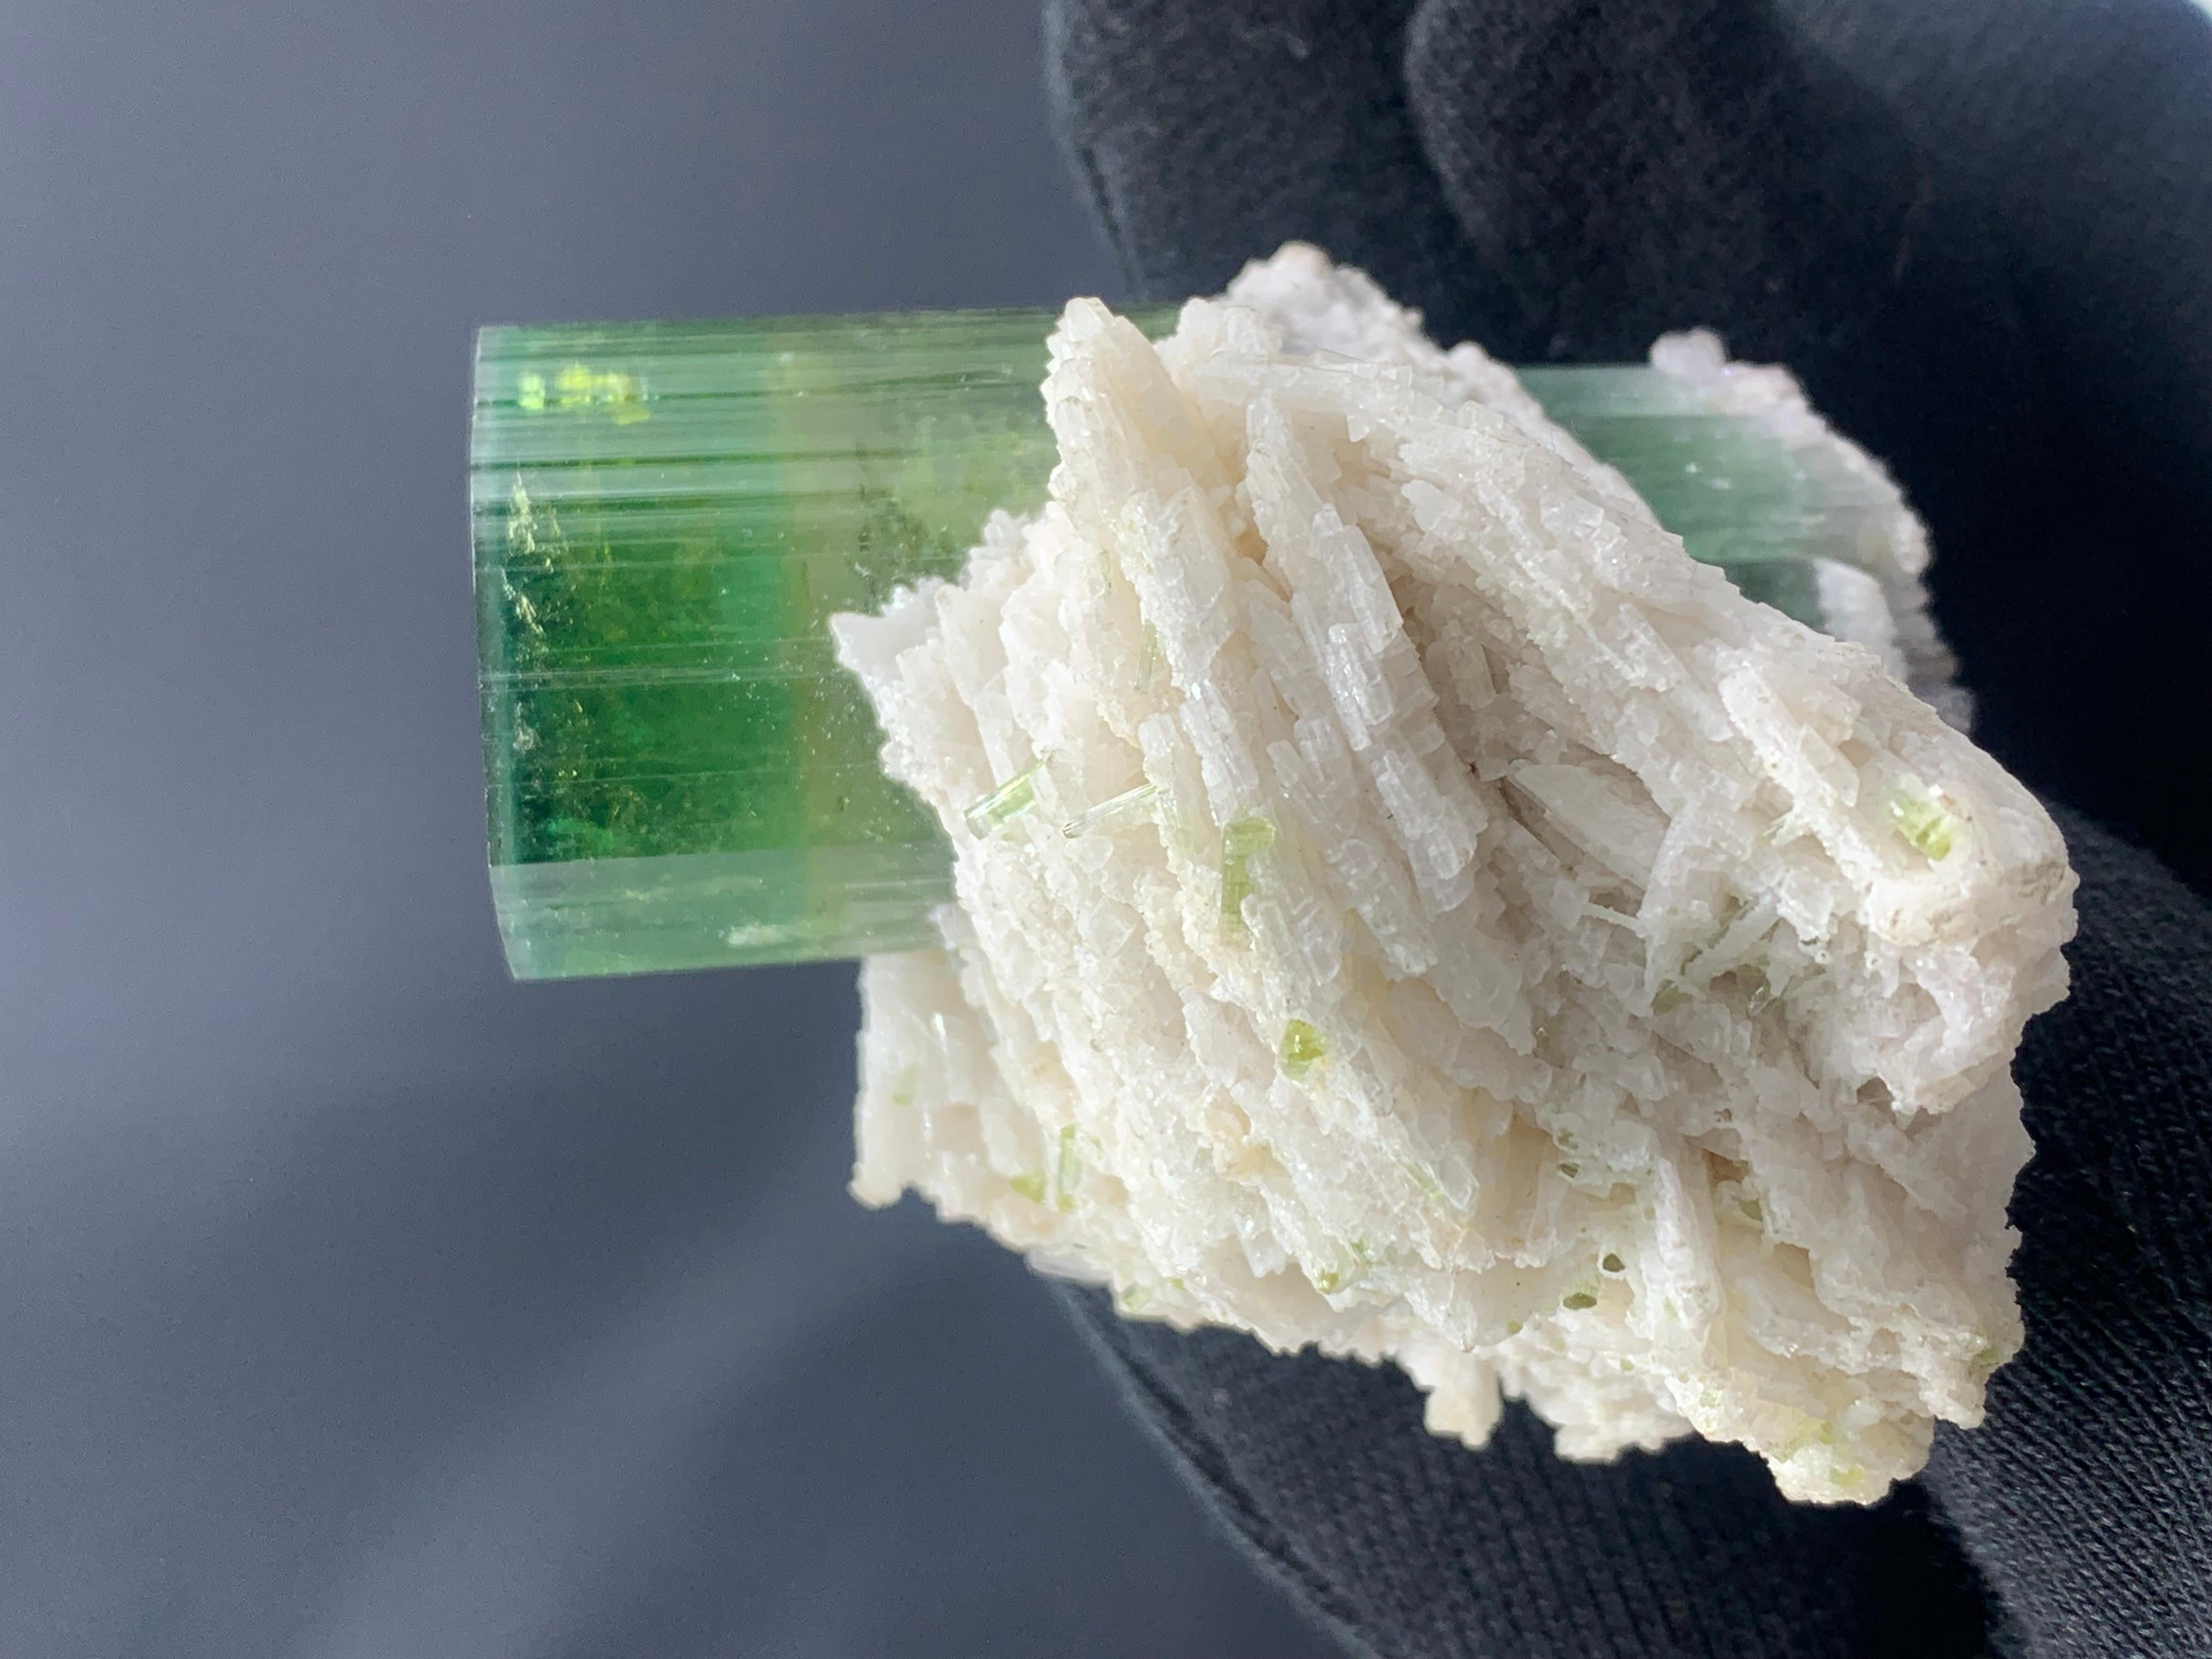 Rock Crystal 149.99 Gam Magnificent Green Tourmaline Specimen from Afghanistan For Sale